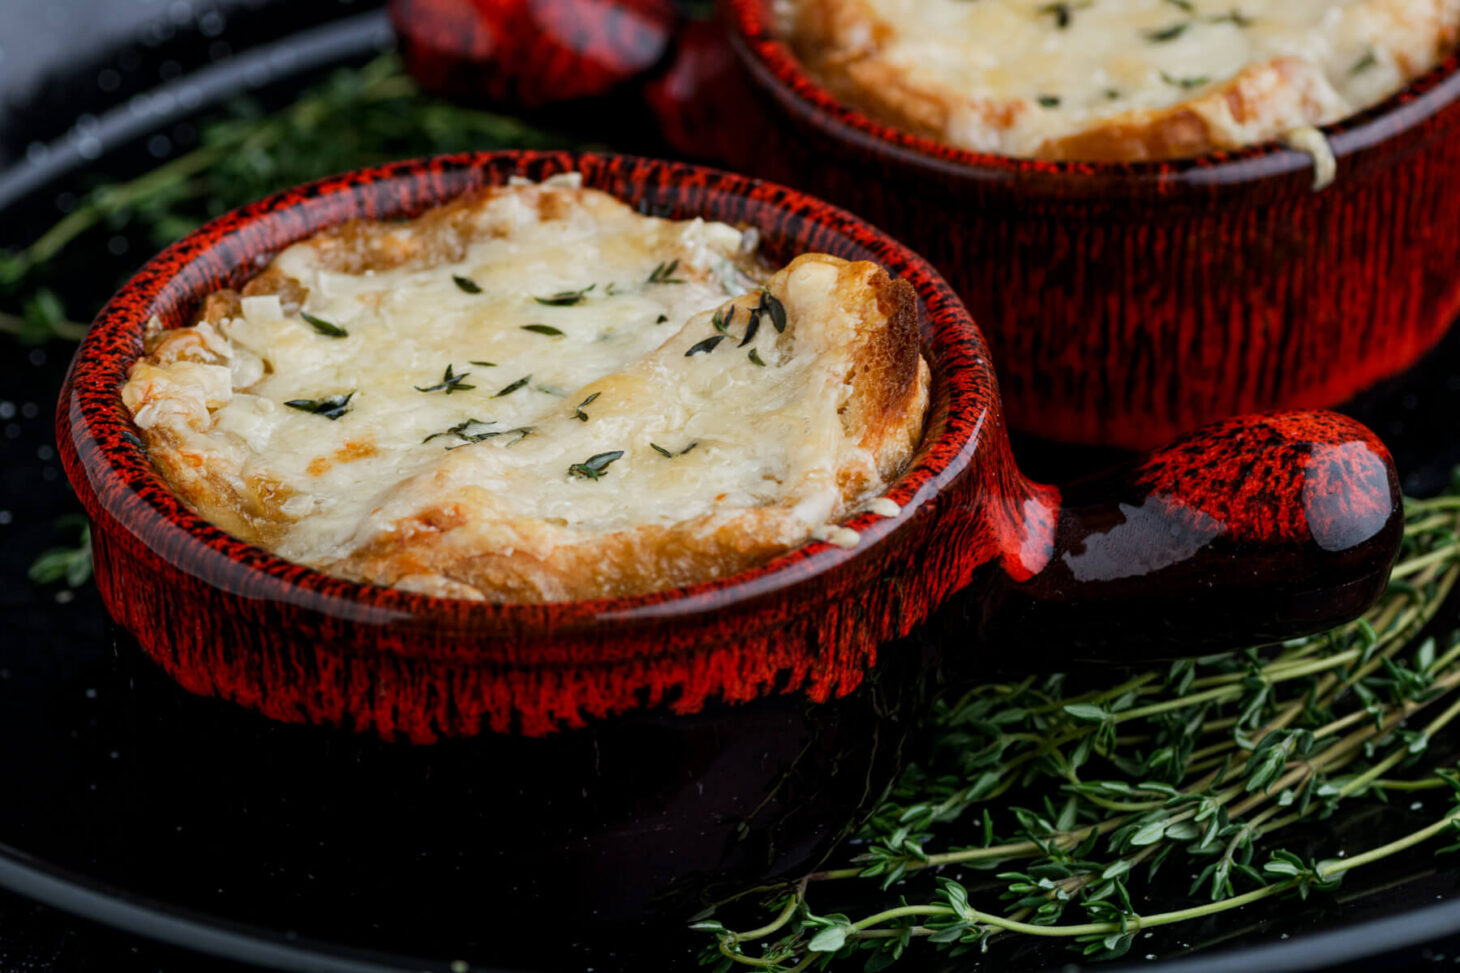 One cheese topped bowls of French Onion soup in stunning pottery soup bowl.